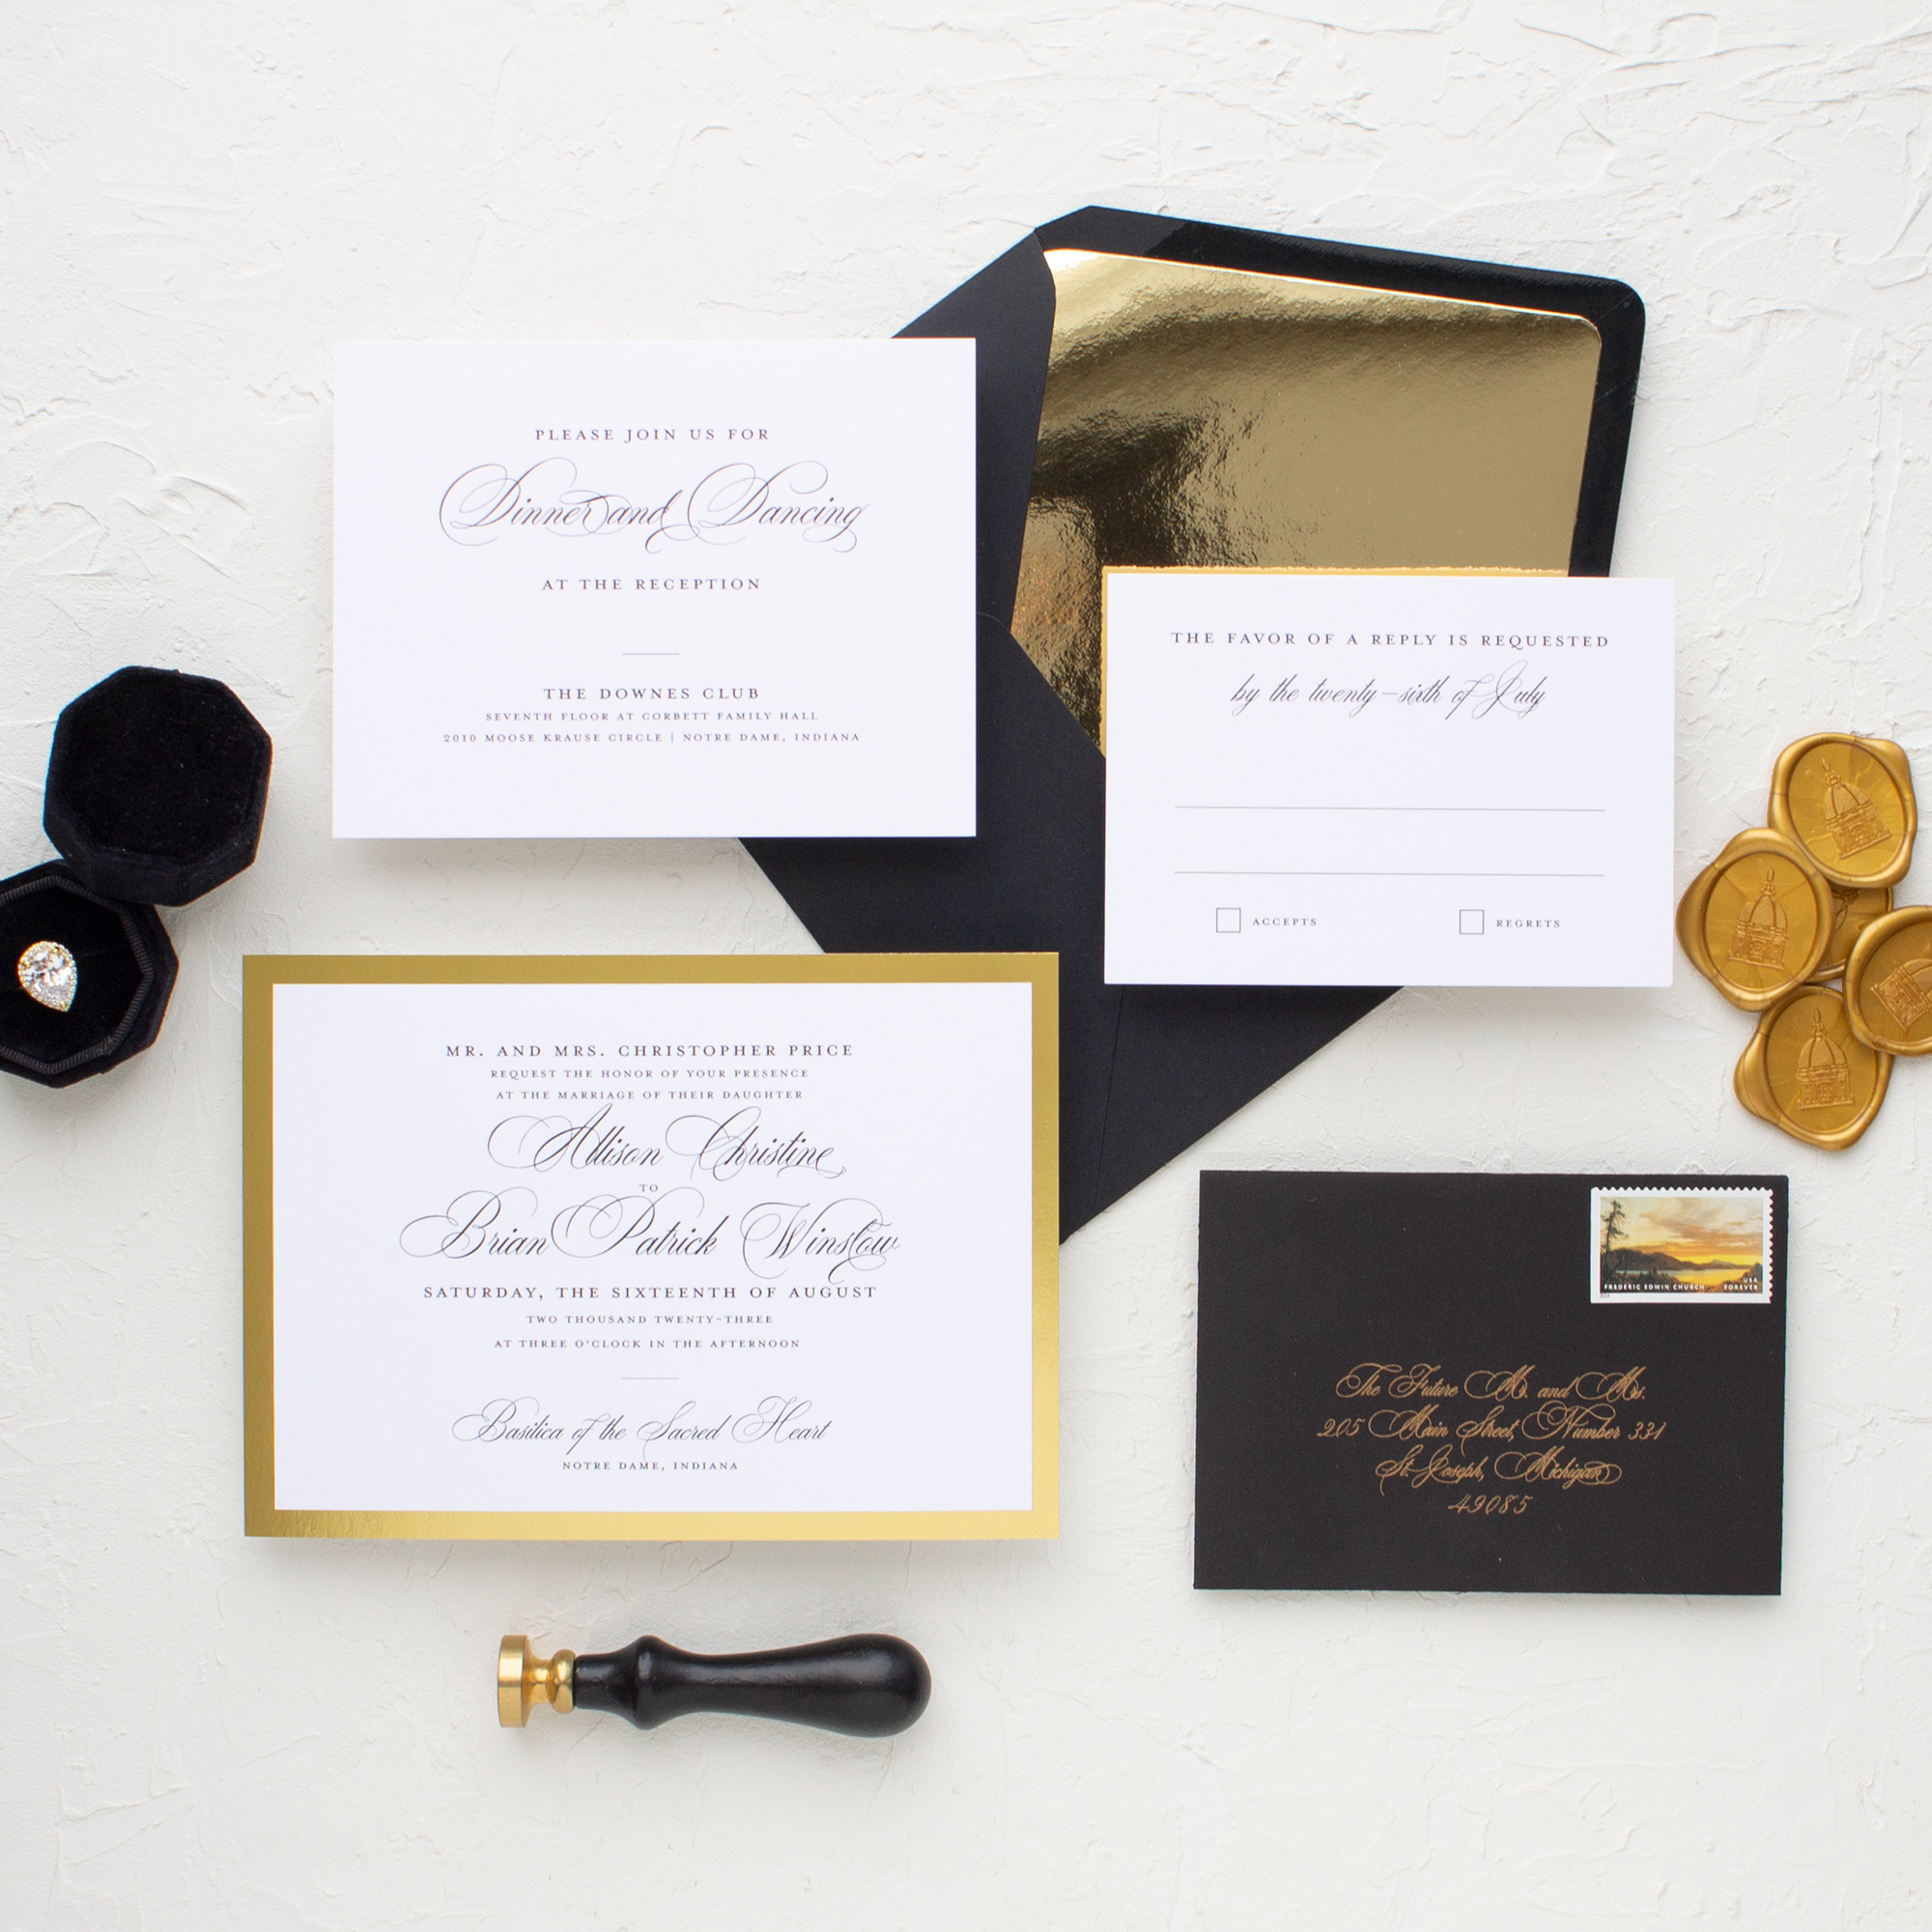 Classic Wedding Invitations for Notre Dame Brides SAMPLE Classic Border Black Foil Stamp Invitations for Formal Weddings